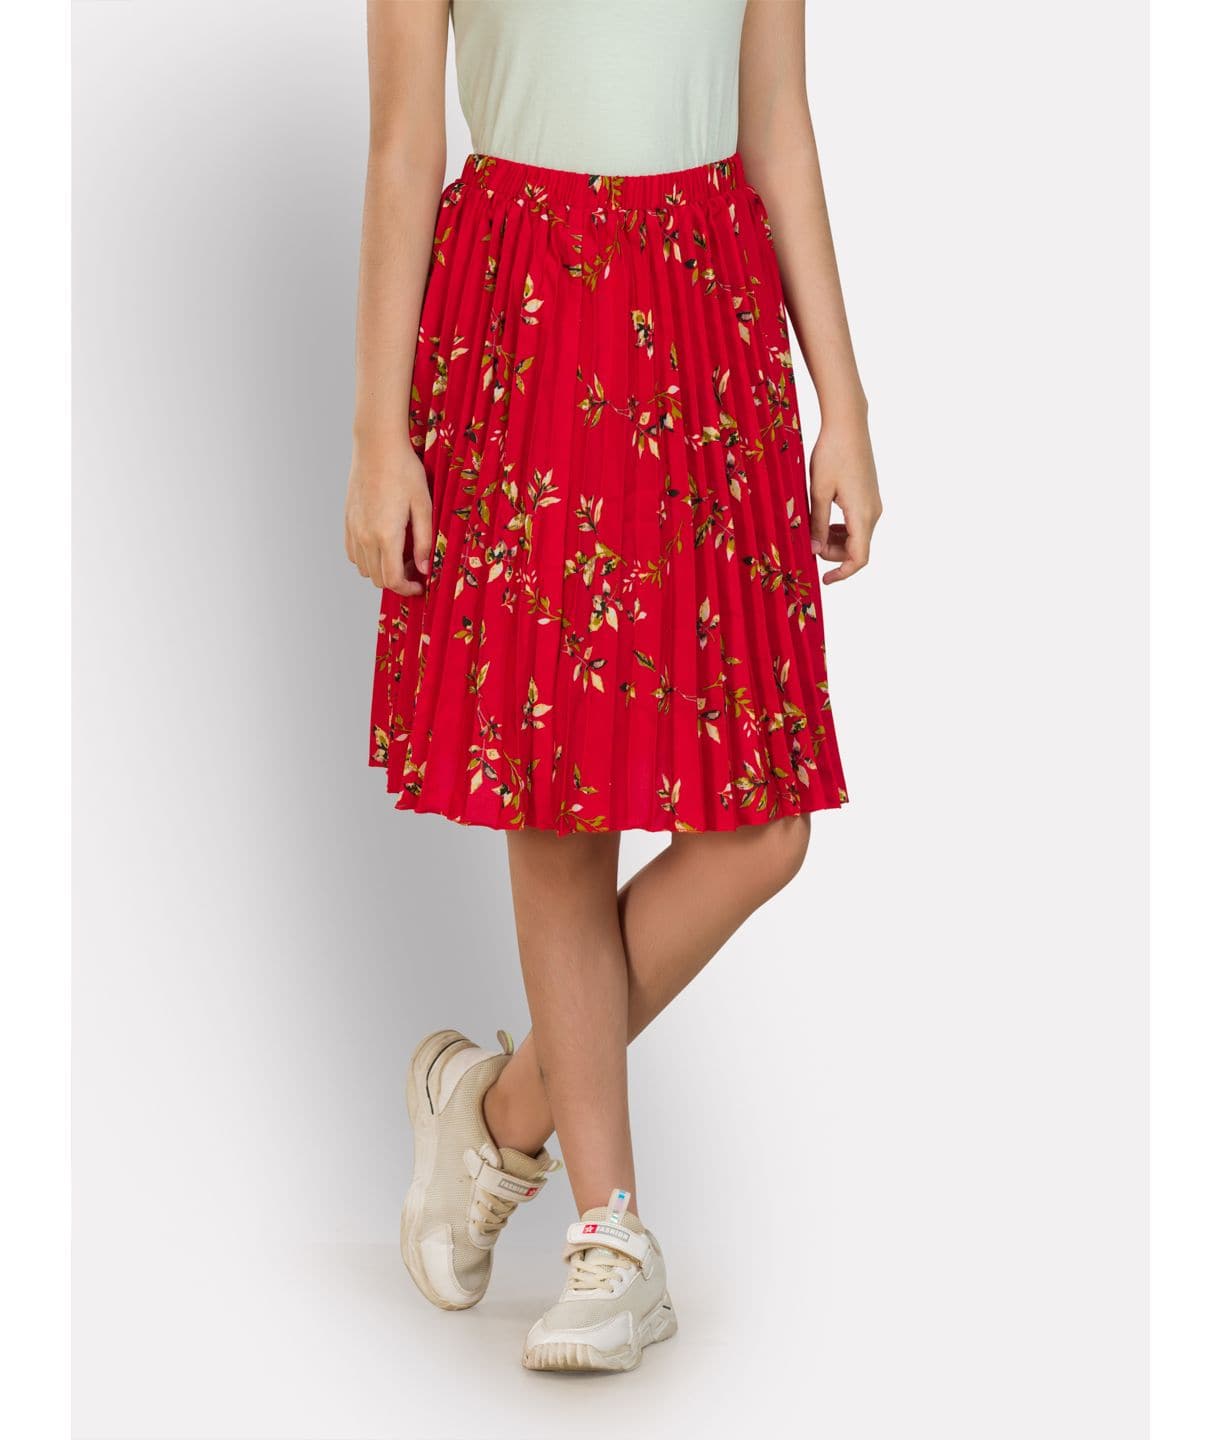 Floral Pleated Skirt for Girls - Uptownie